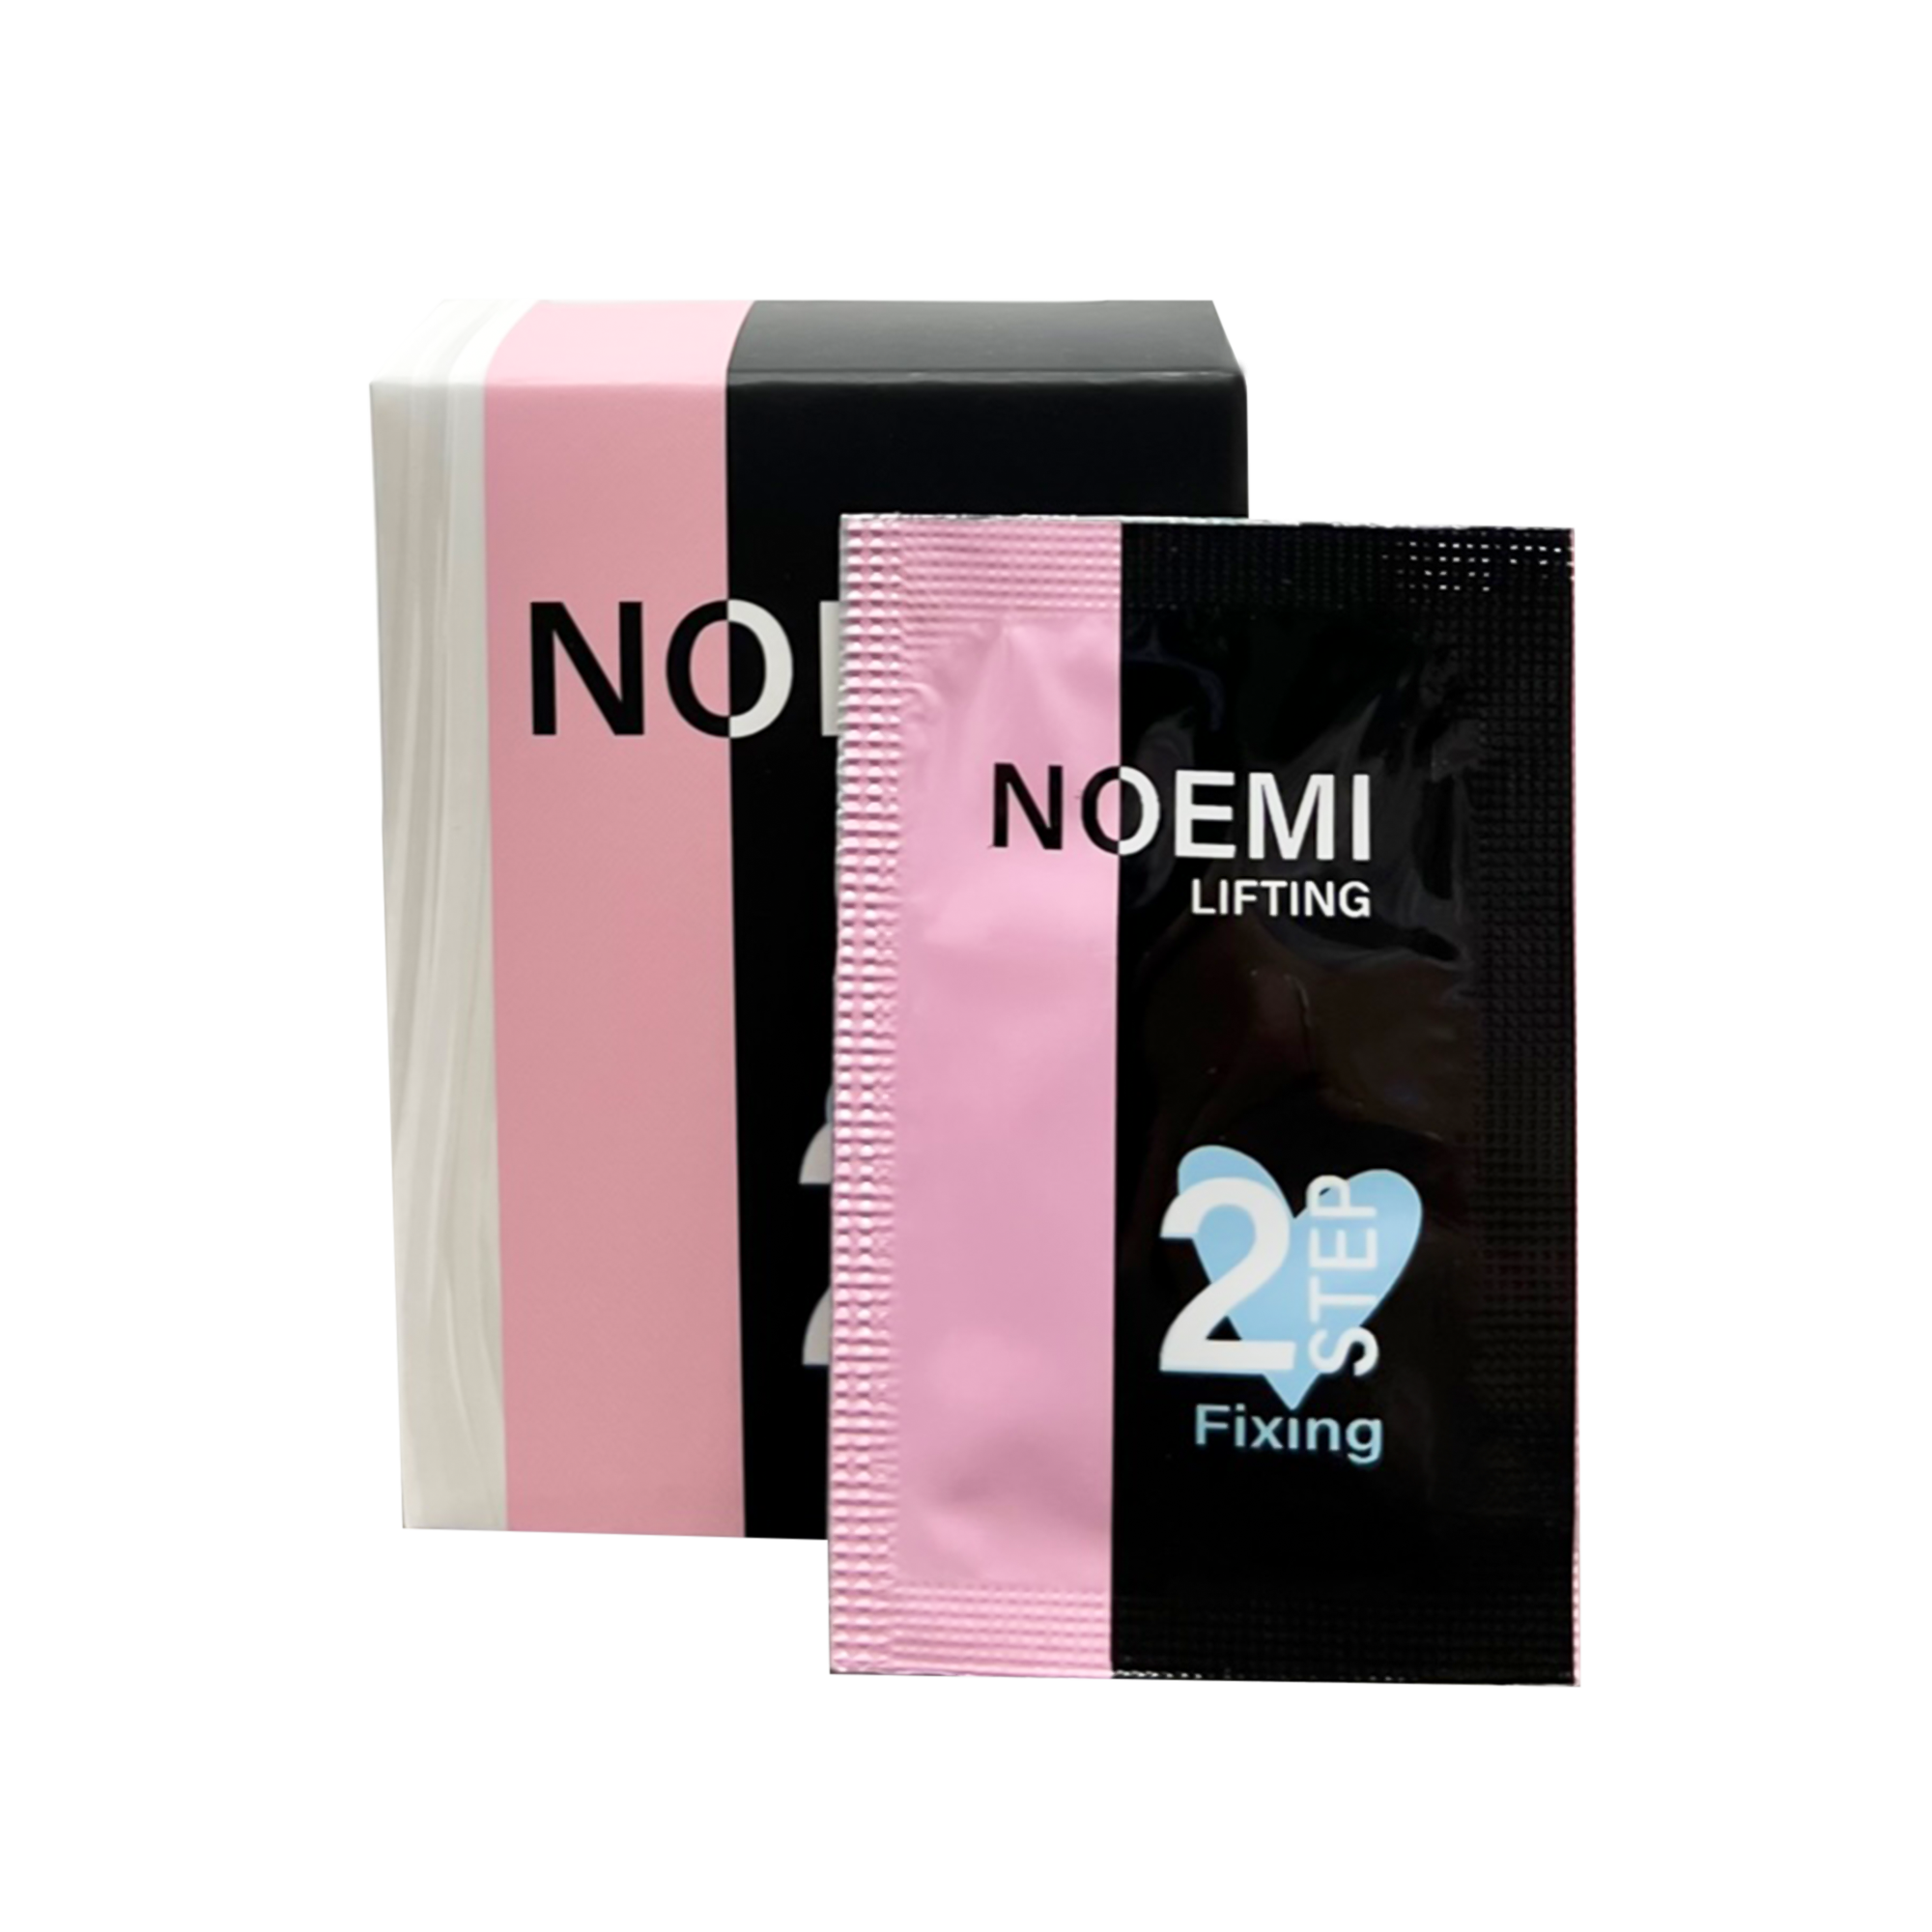 Noemi Lifting - Fix Lotion Step 2 - (10 Sachets with 1ml)